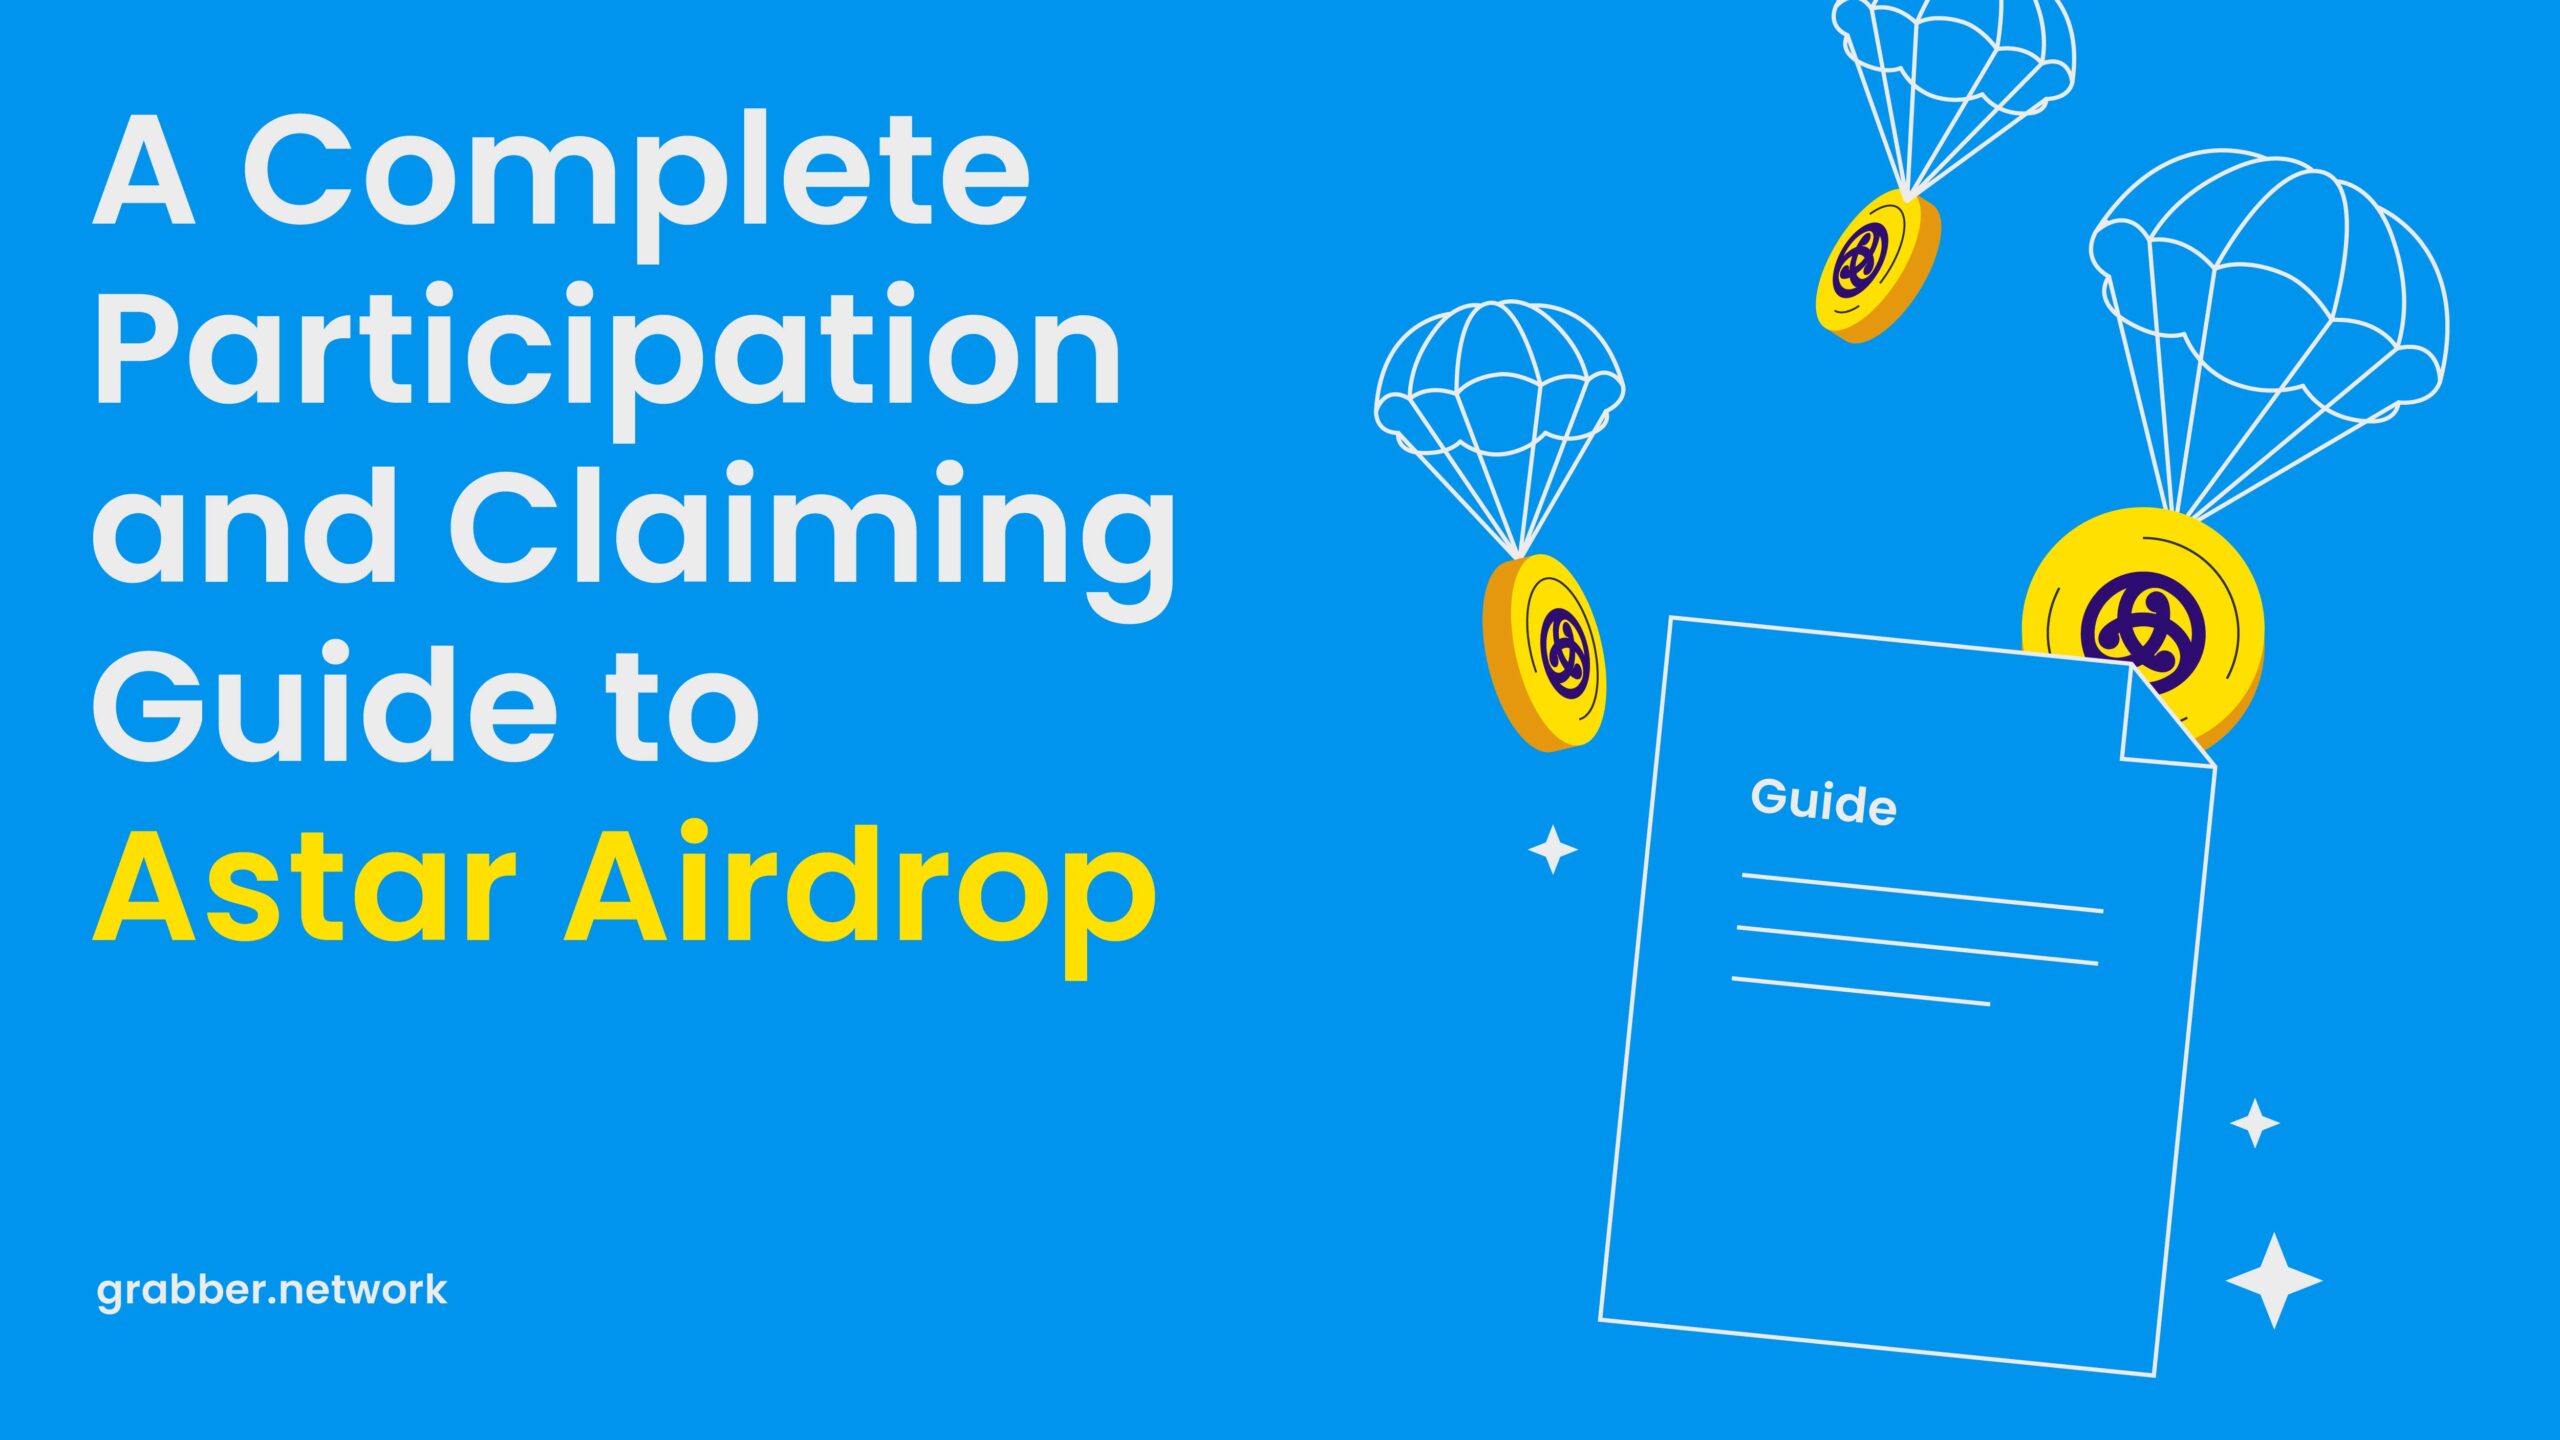 A Complete Participation and Claiming Guide to Astar Airdrop